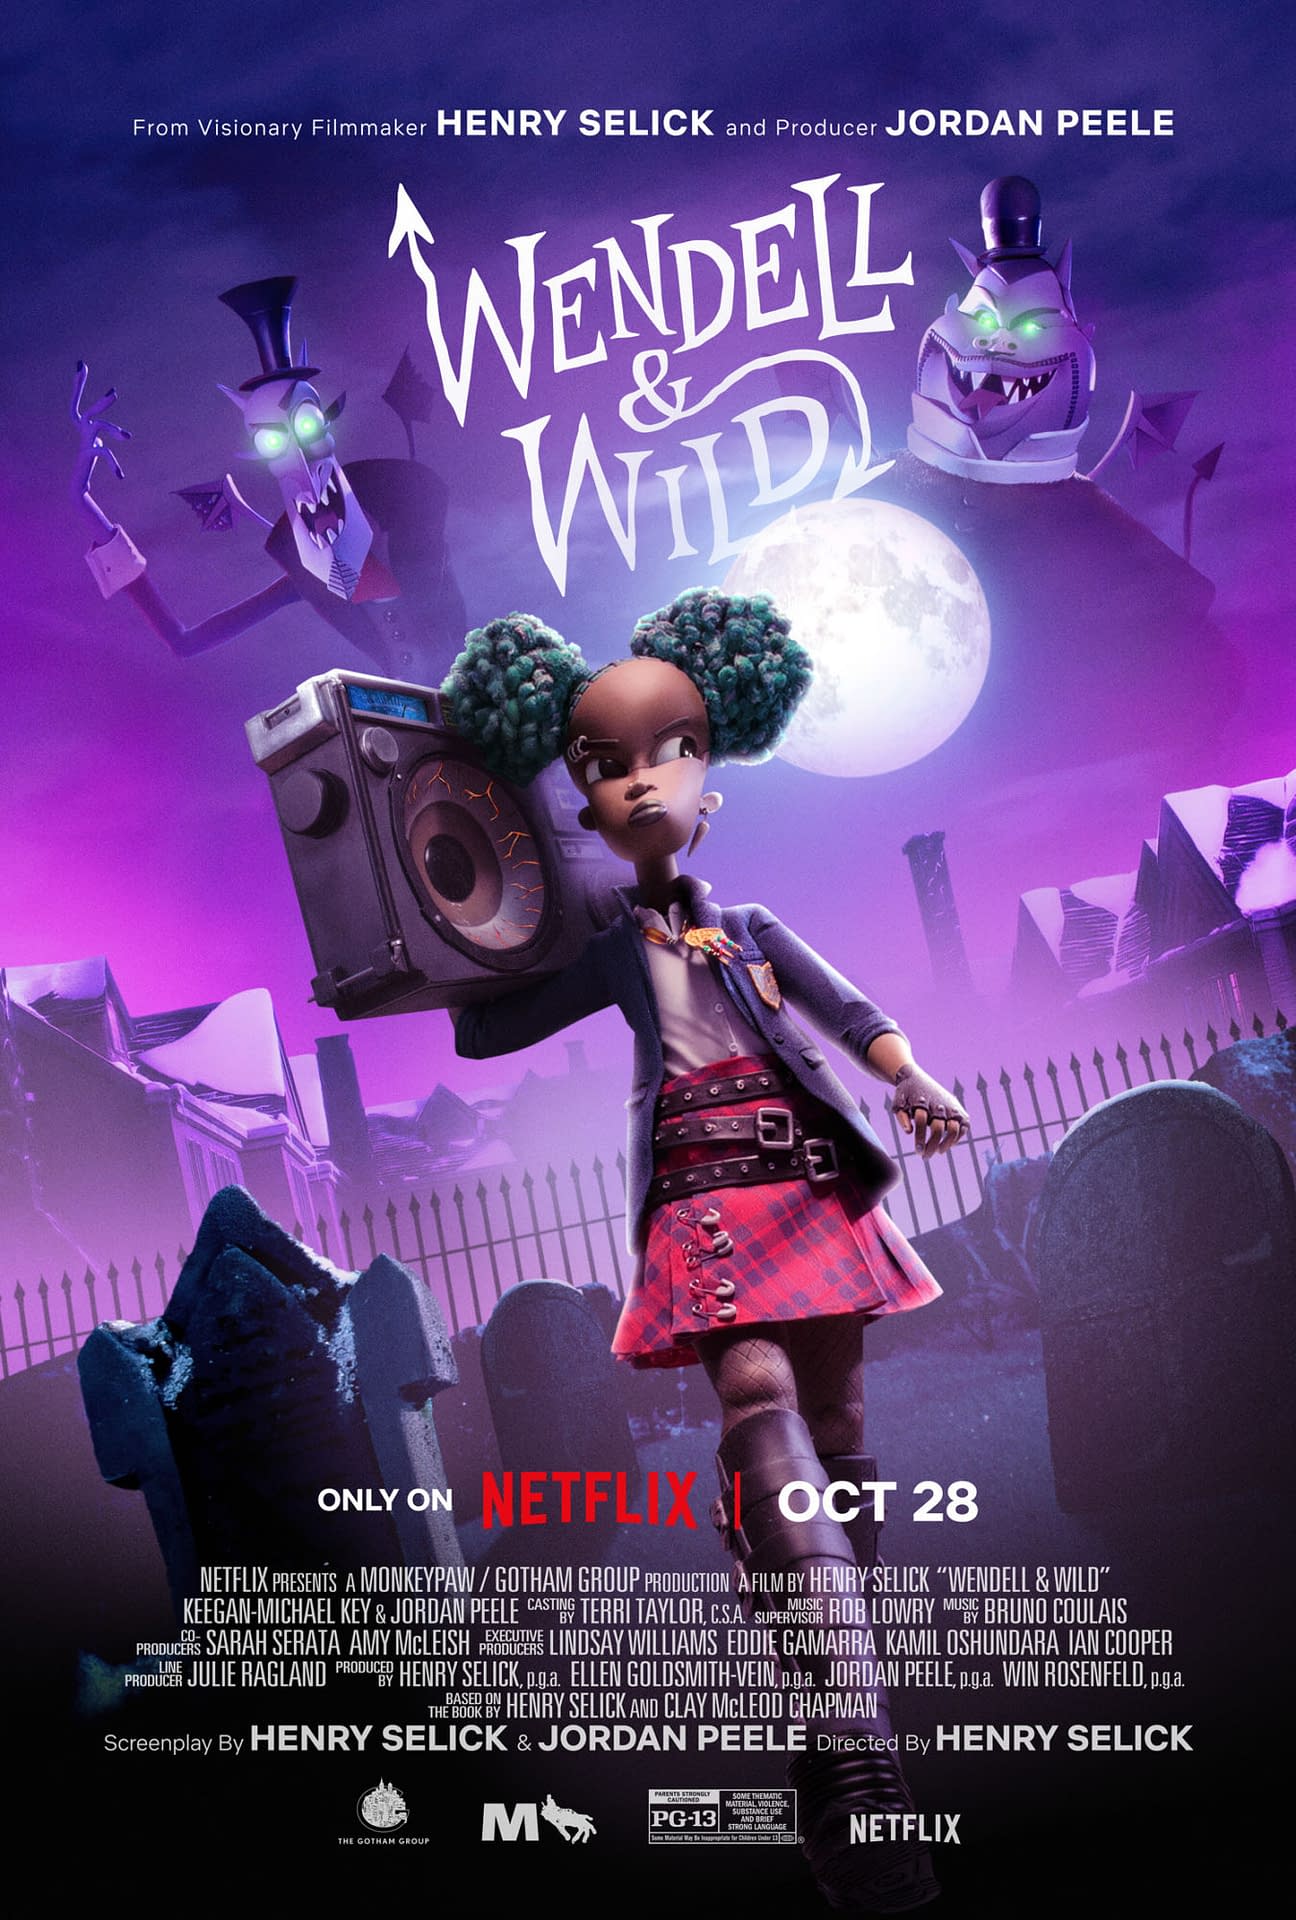 The New Trailer For Wendell & Wild Looks Absolutely Fantastic